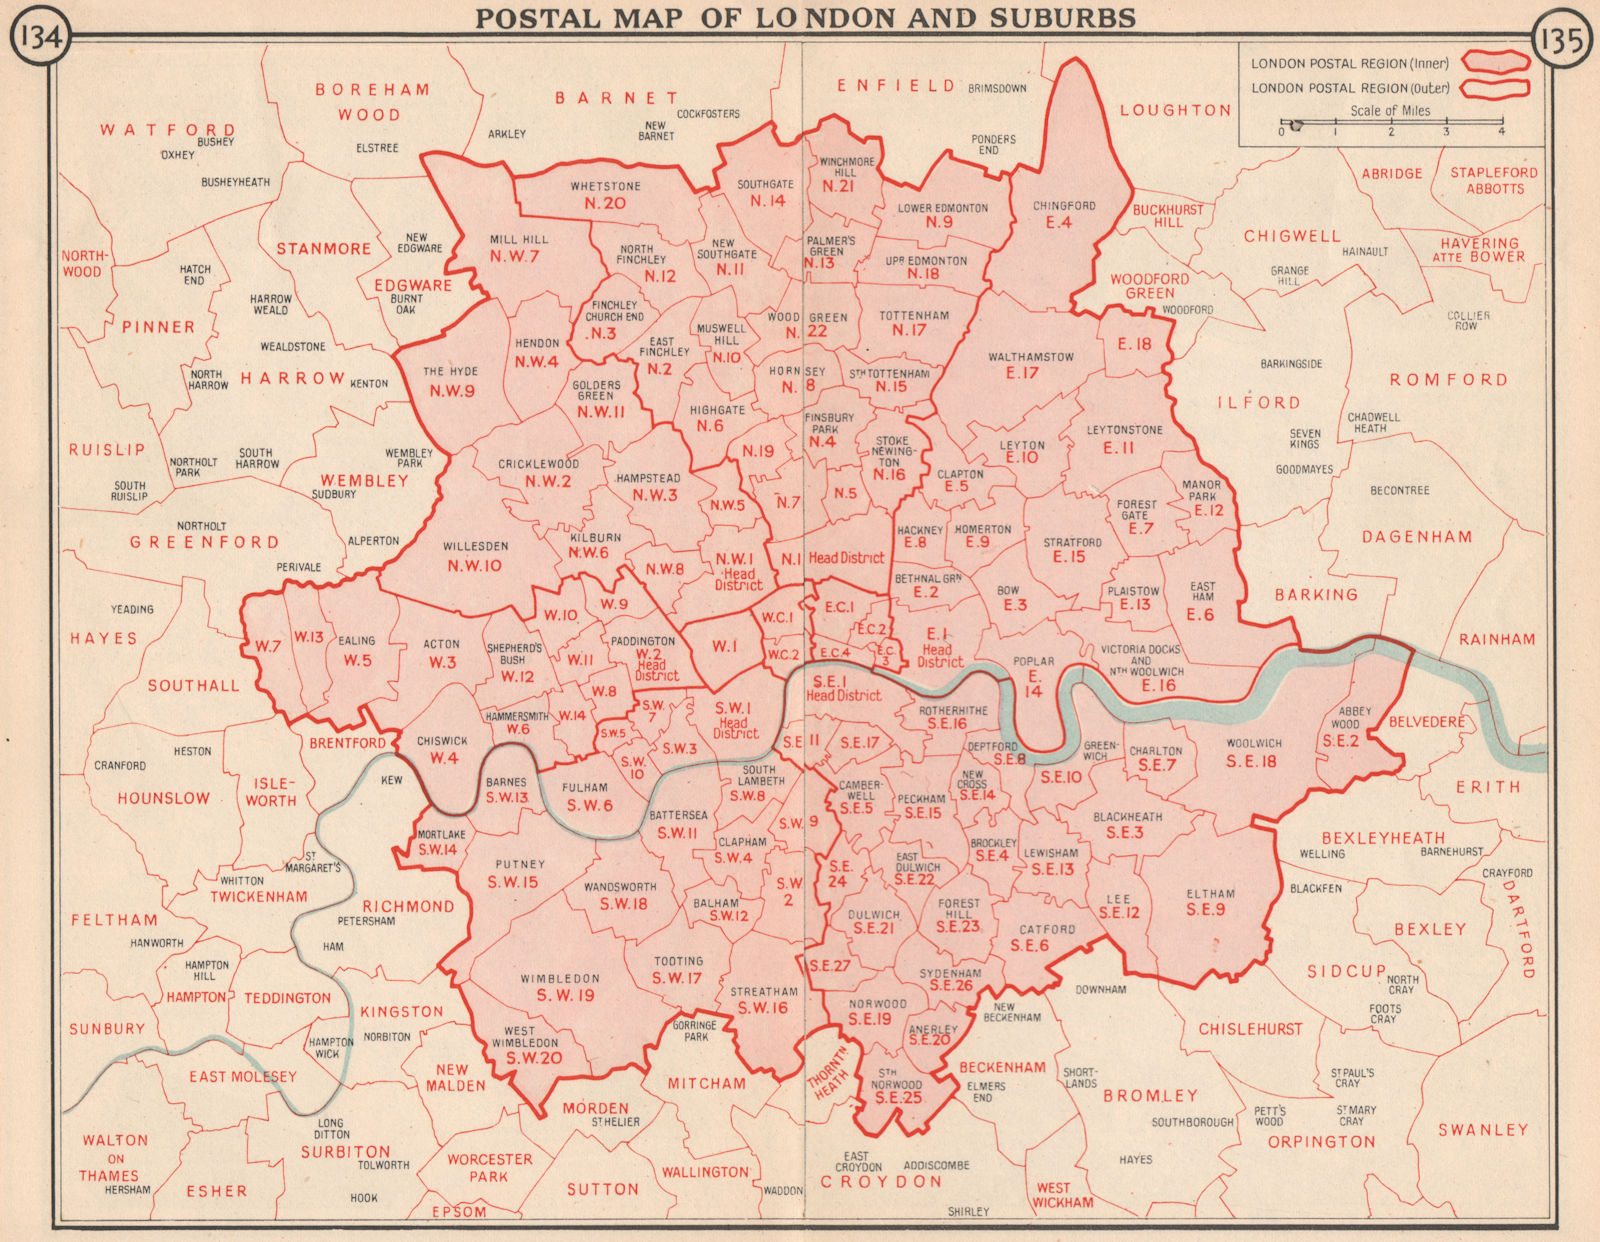 Associate Product Postal map of London and Suburbs. Postcodes. Postal regions. Zipcodes 1953